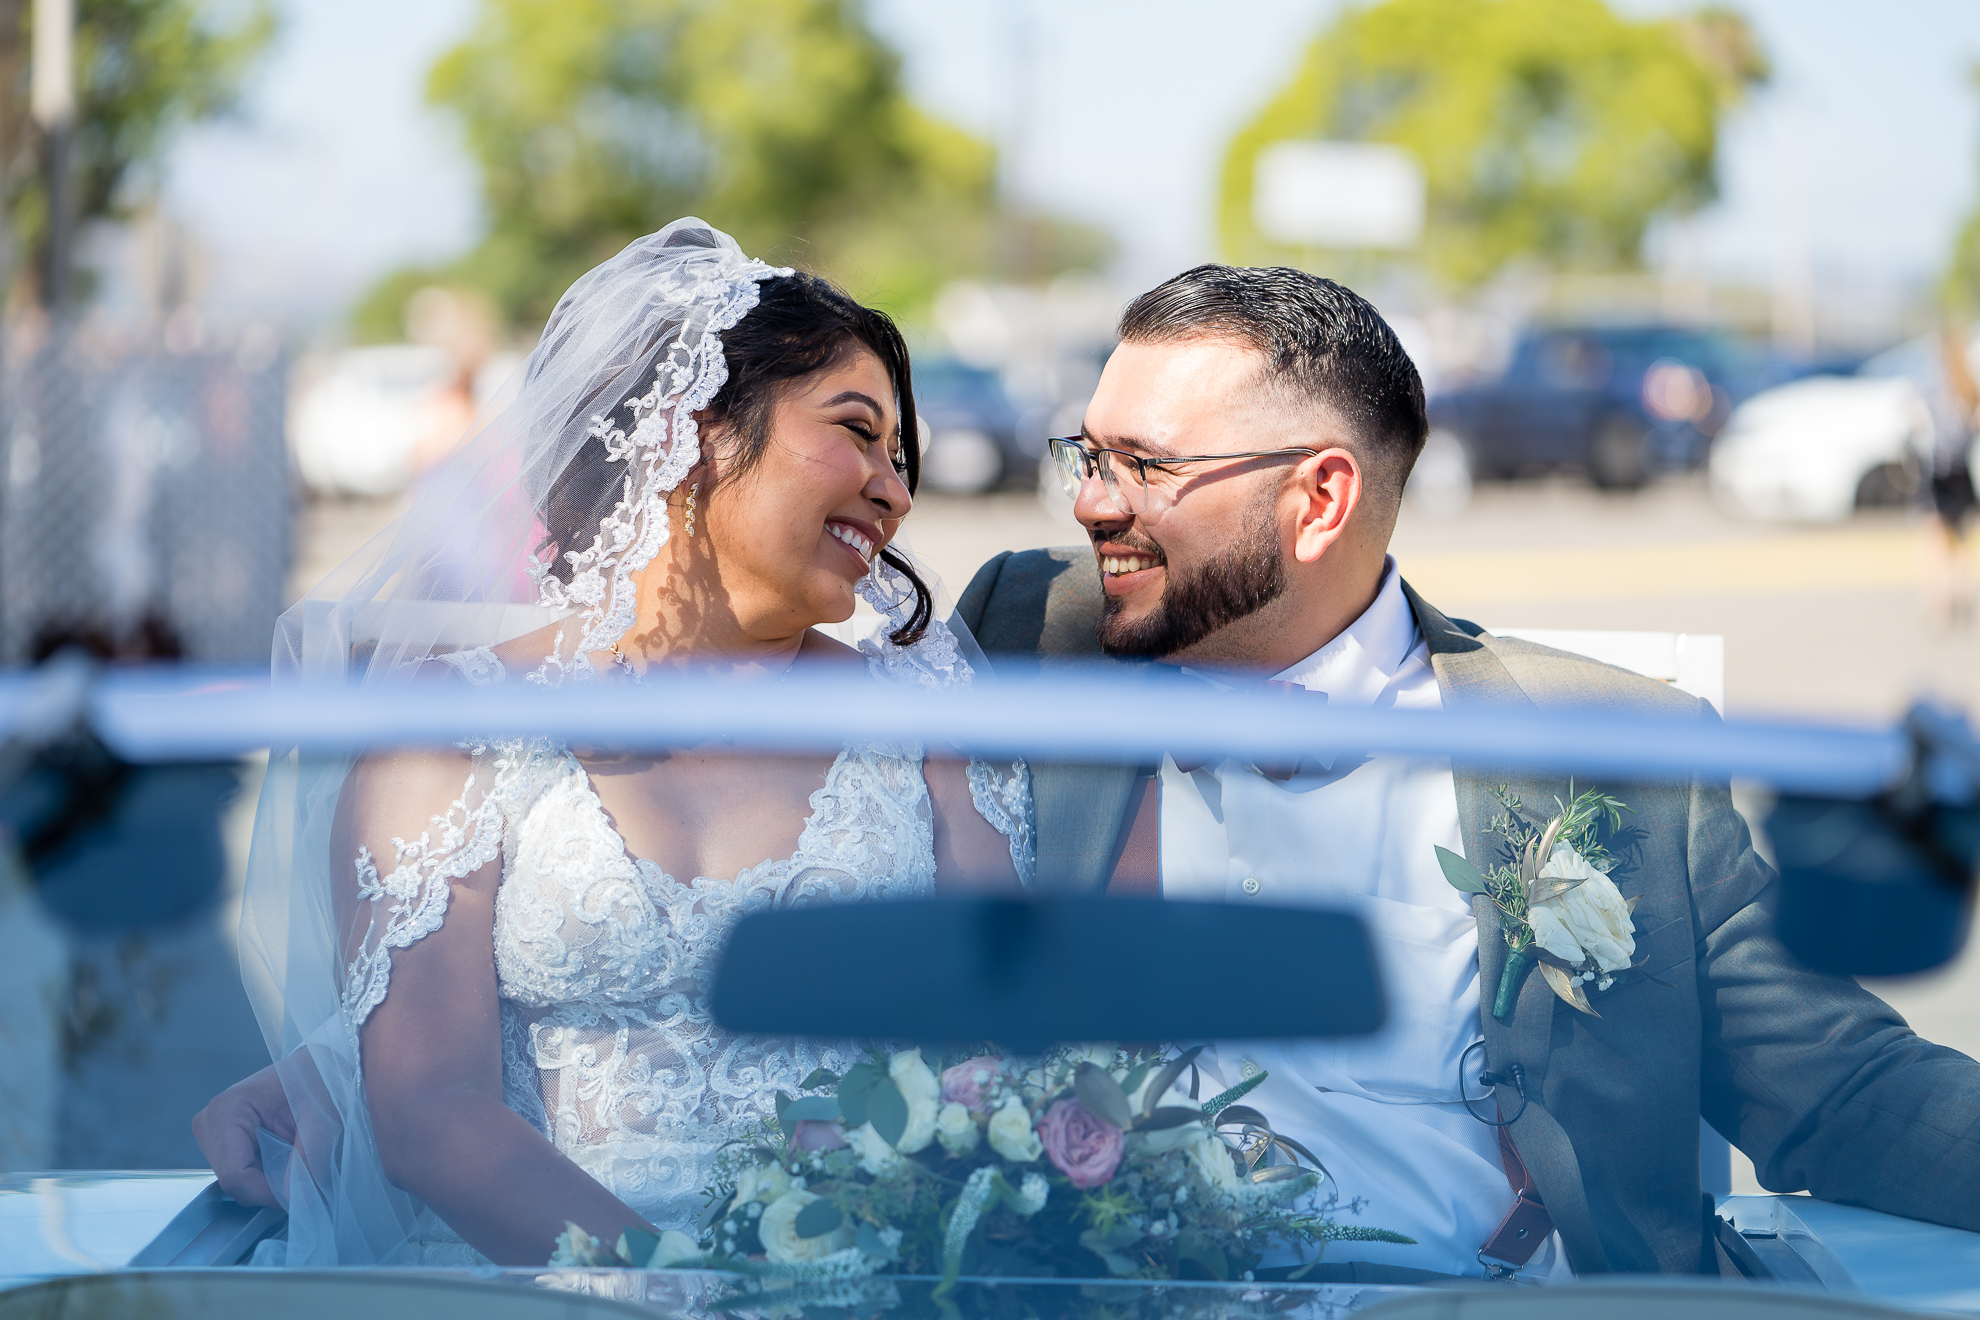 ThomasKim_photography A bride and groom, S & A, smiling in a convertible car.